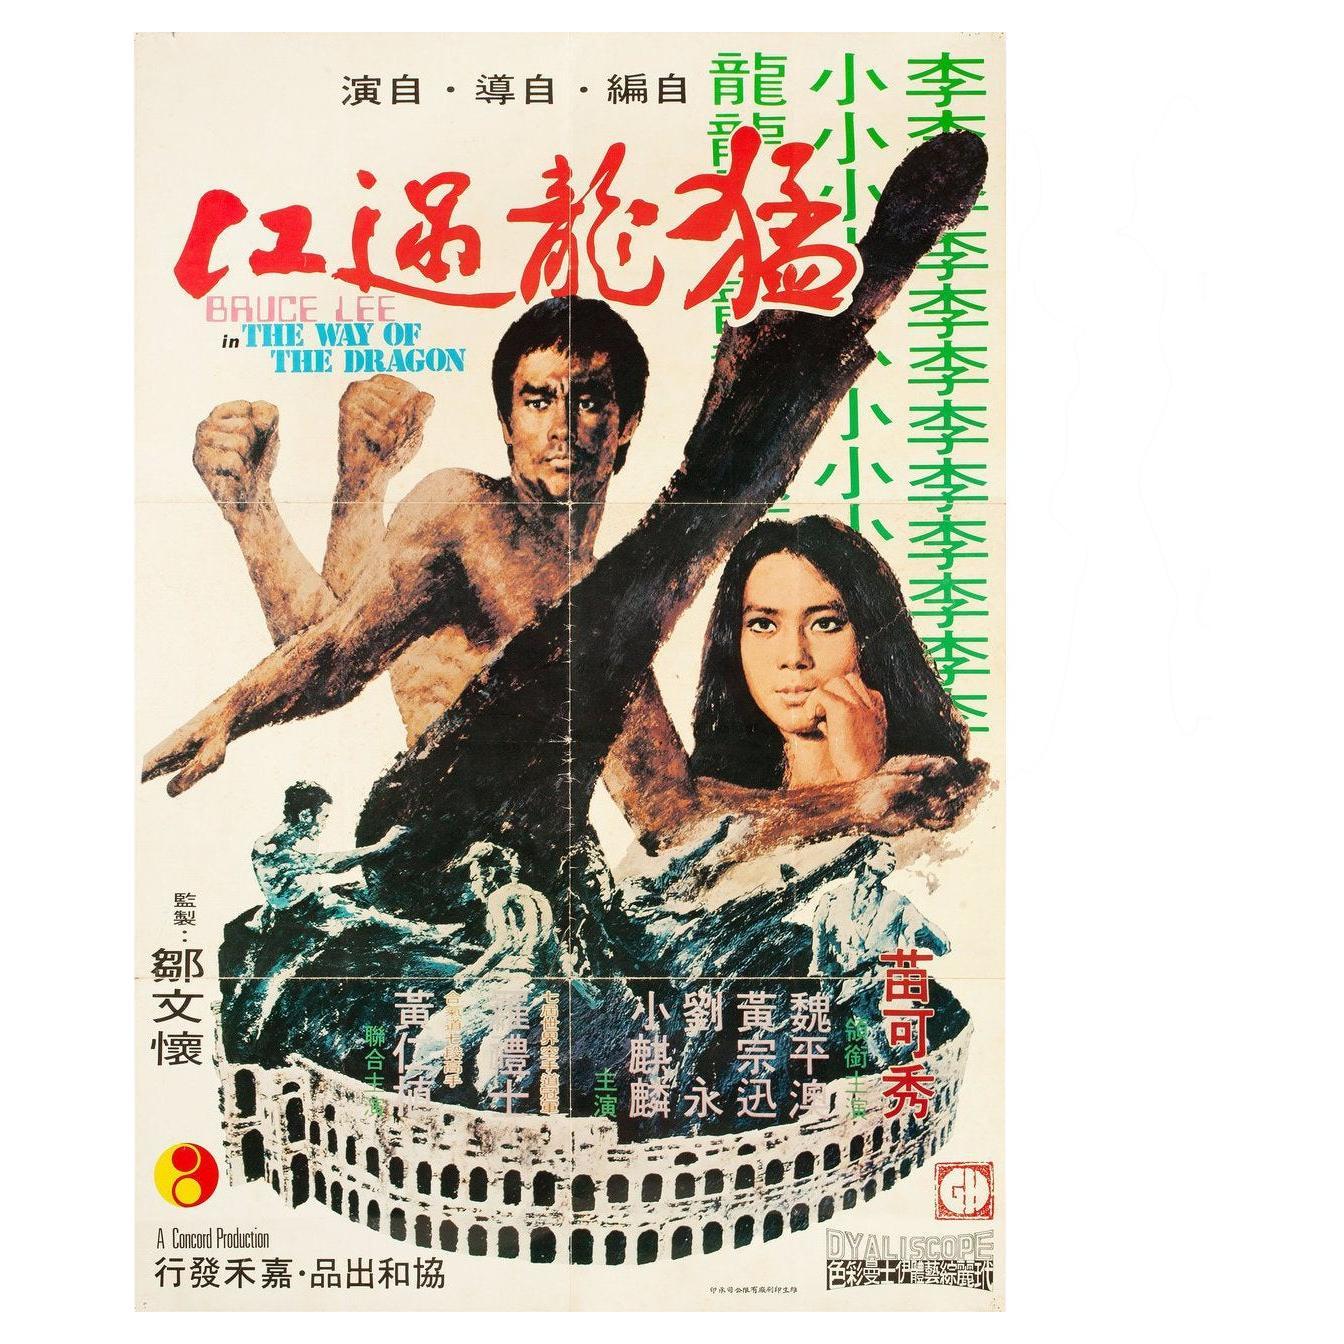 The Way of the Dragon 1975 Japanese Film Poster